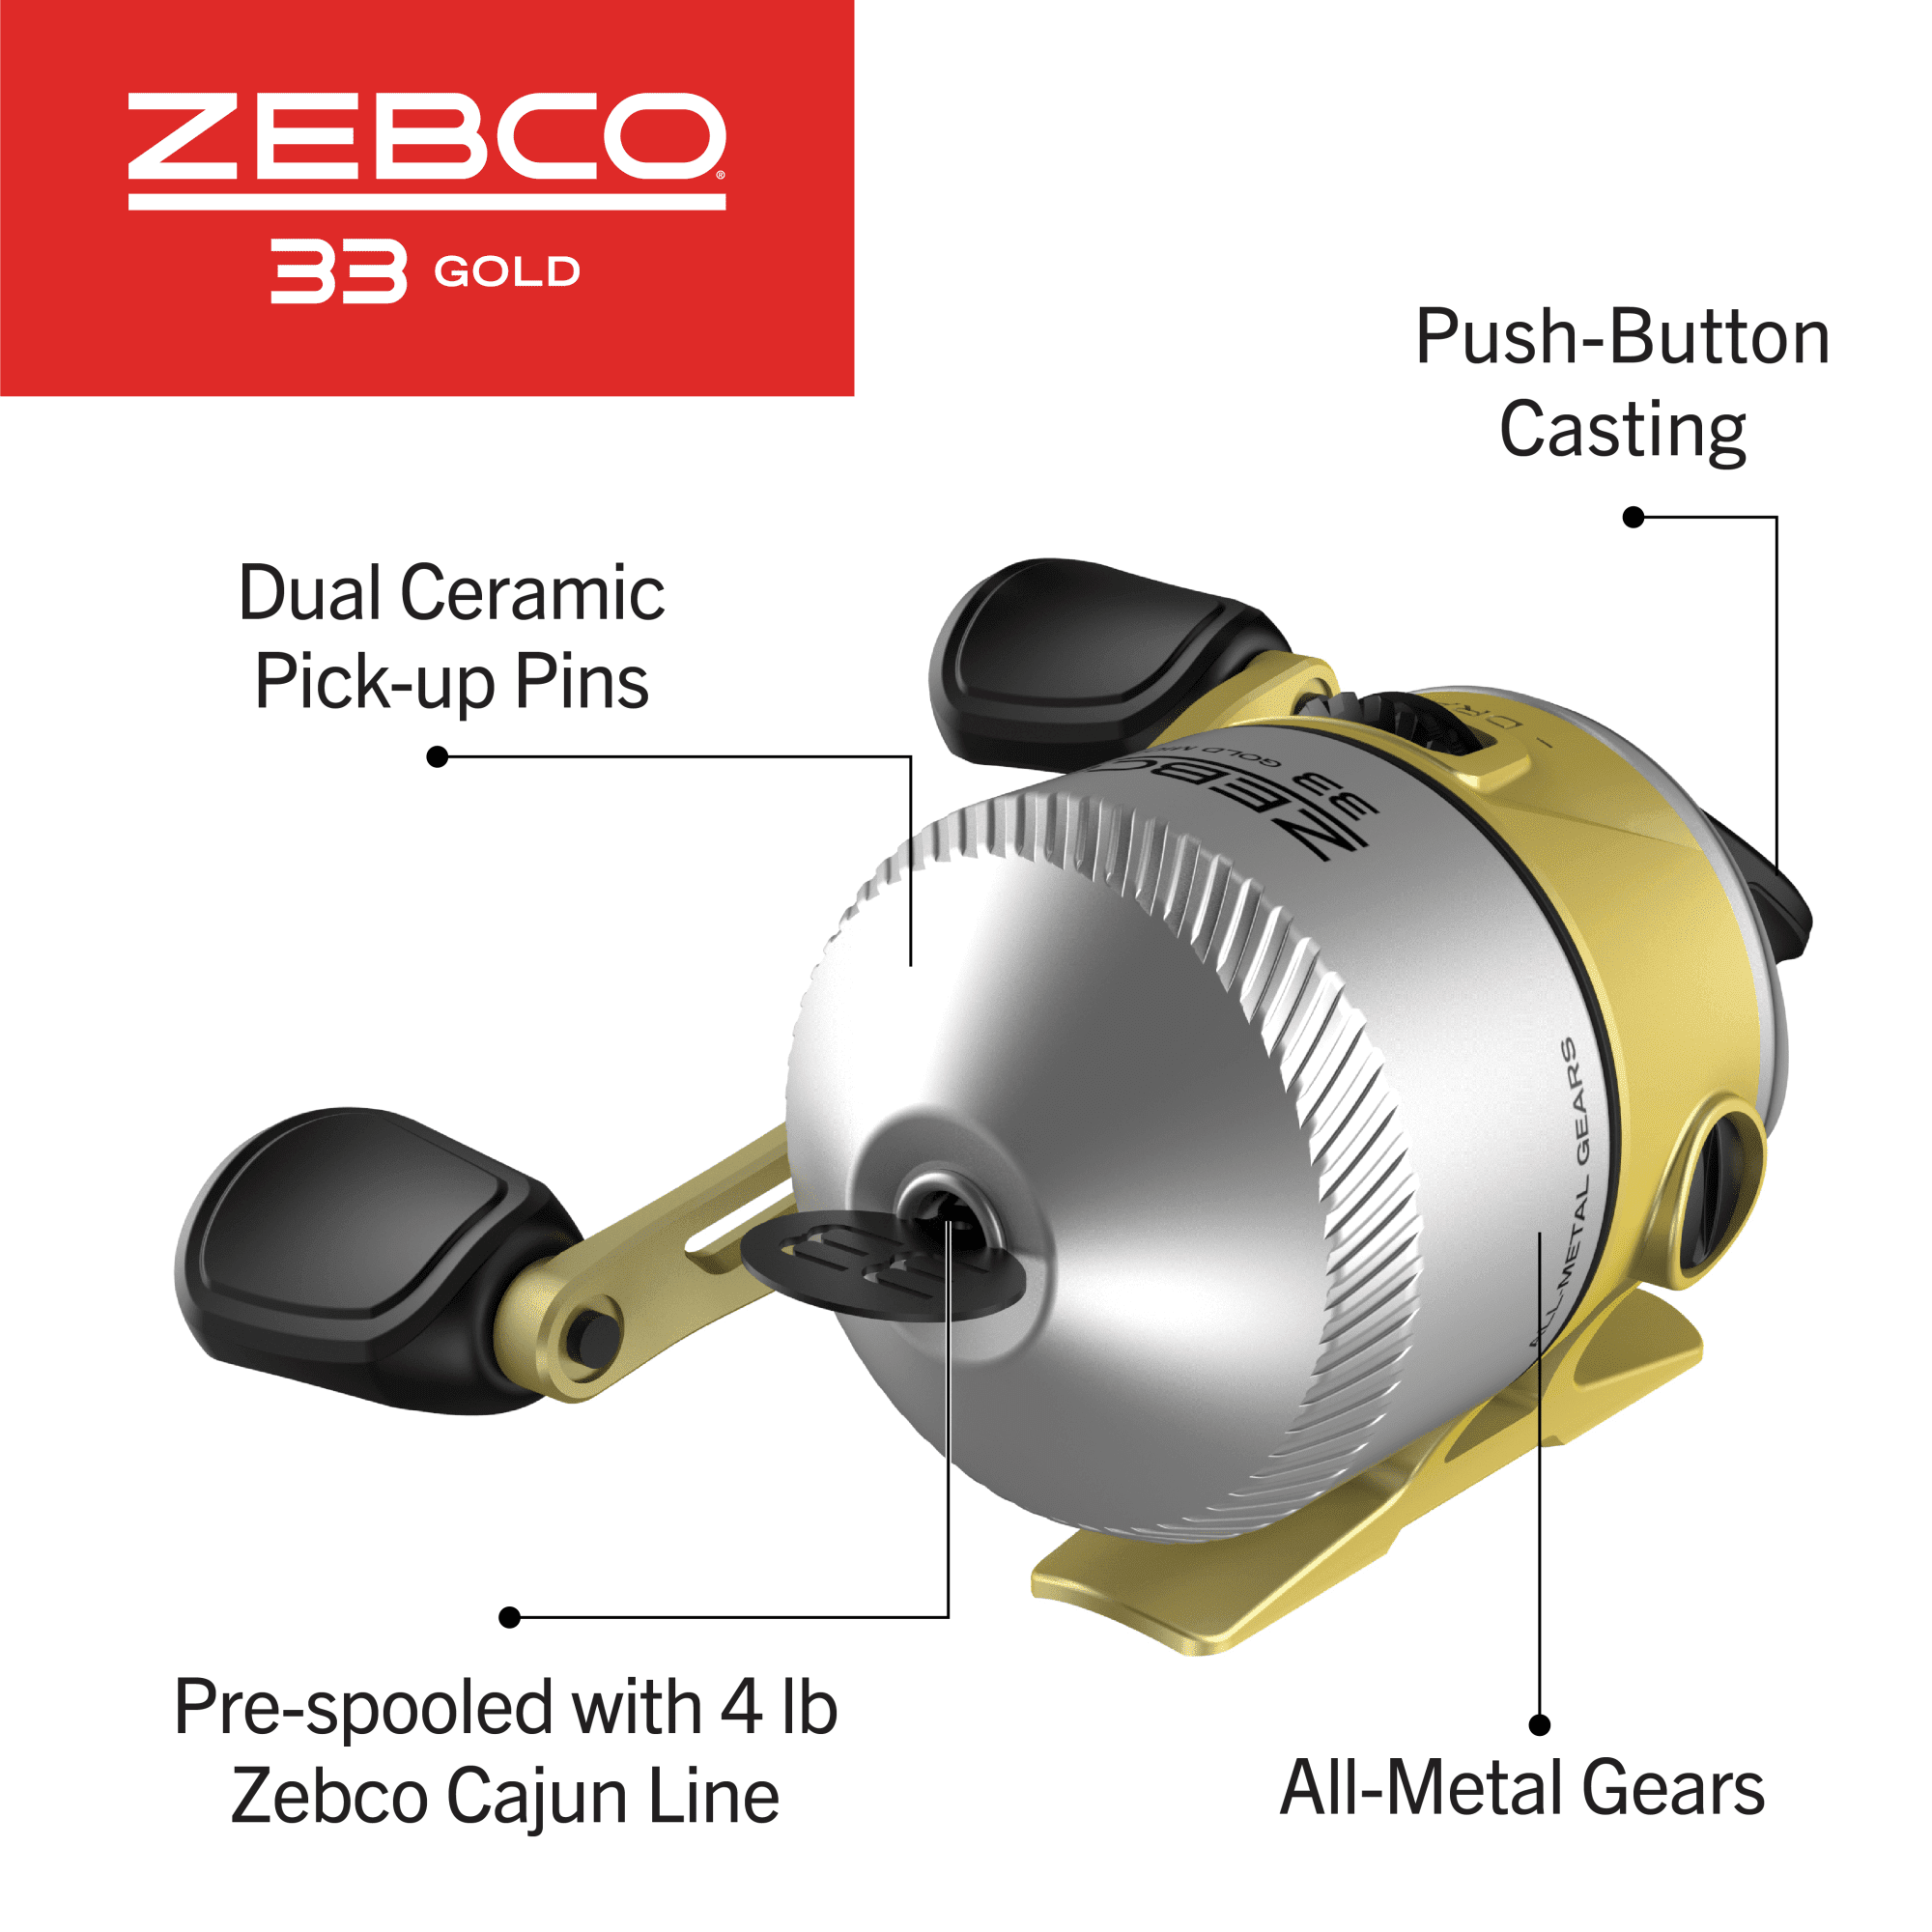 Zebco 33 Gold Micro Spincast Fishing Reel, Size 10 Reel, Silver